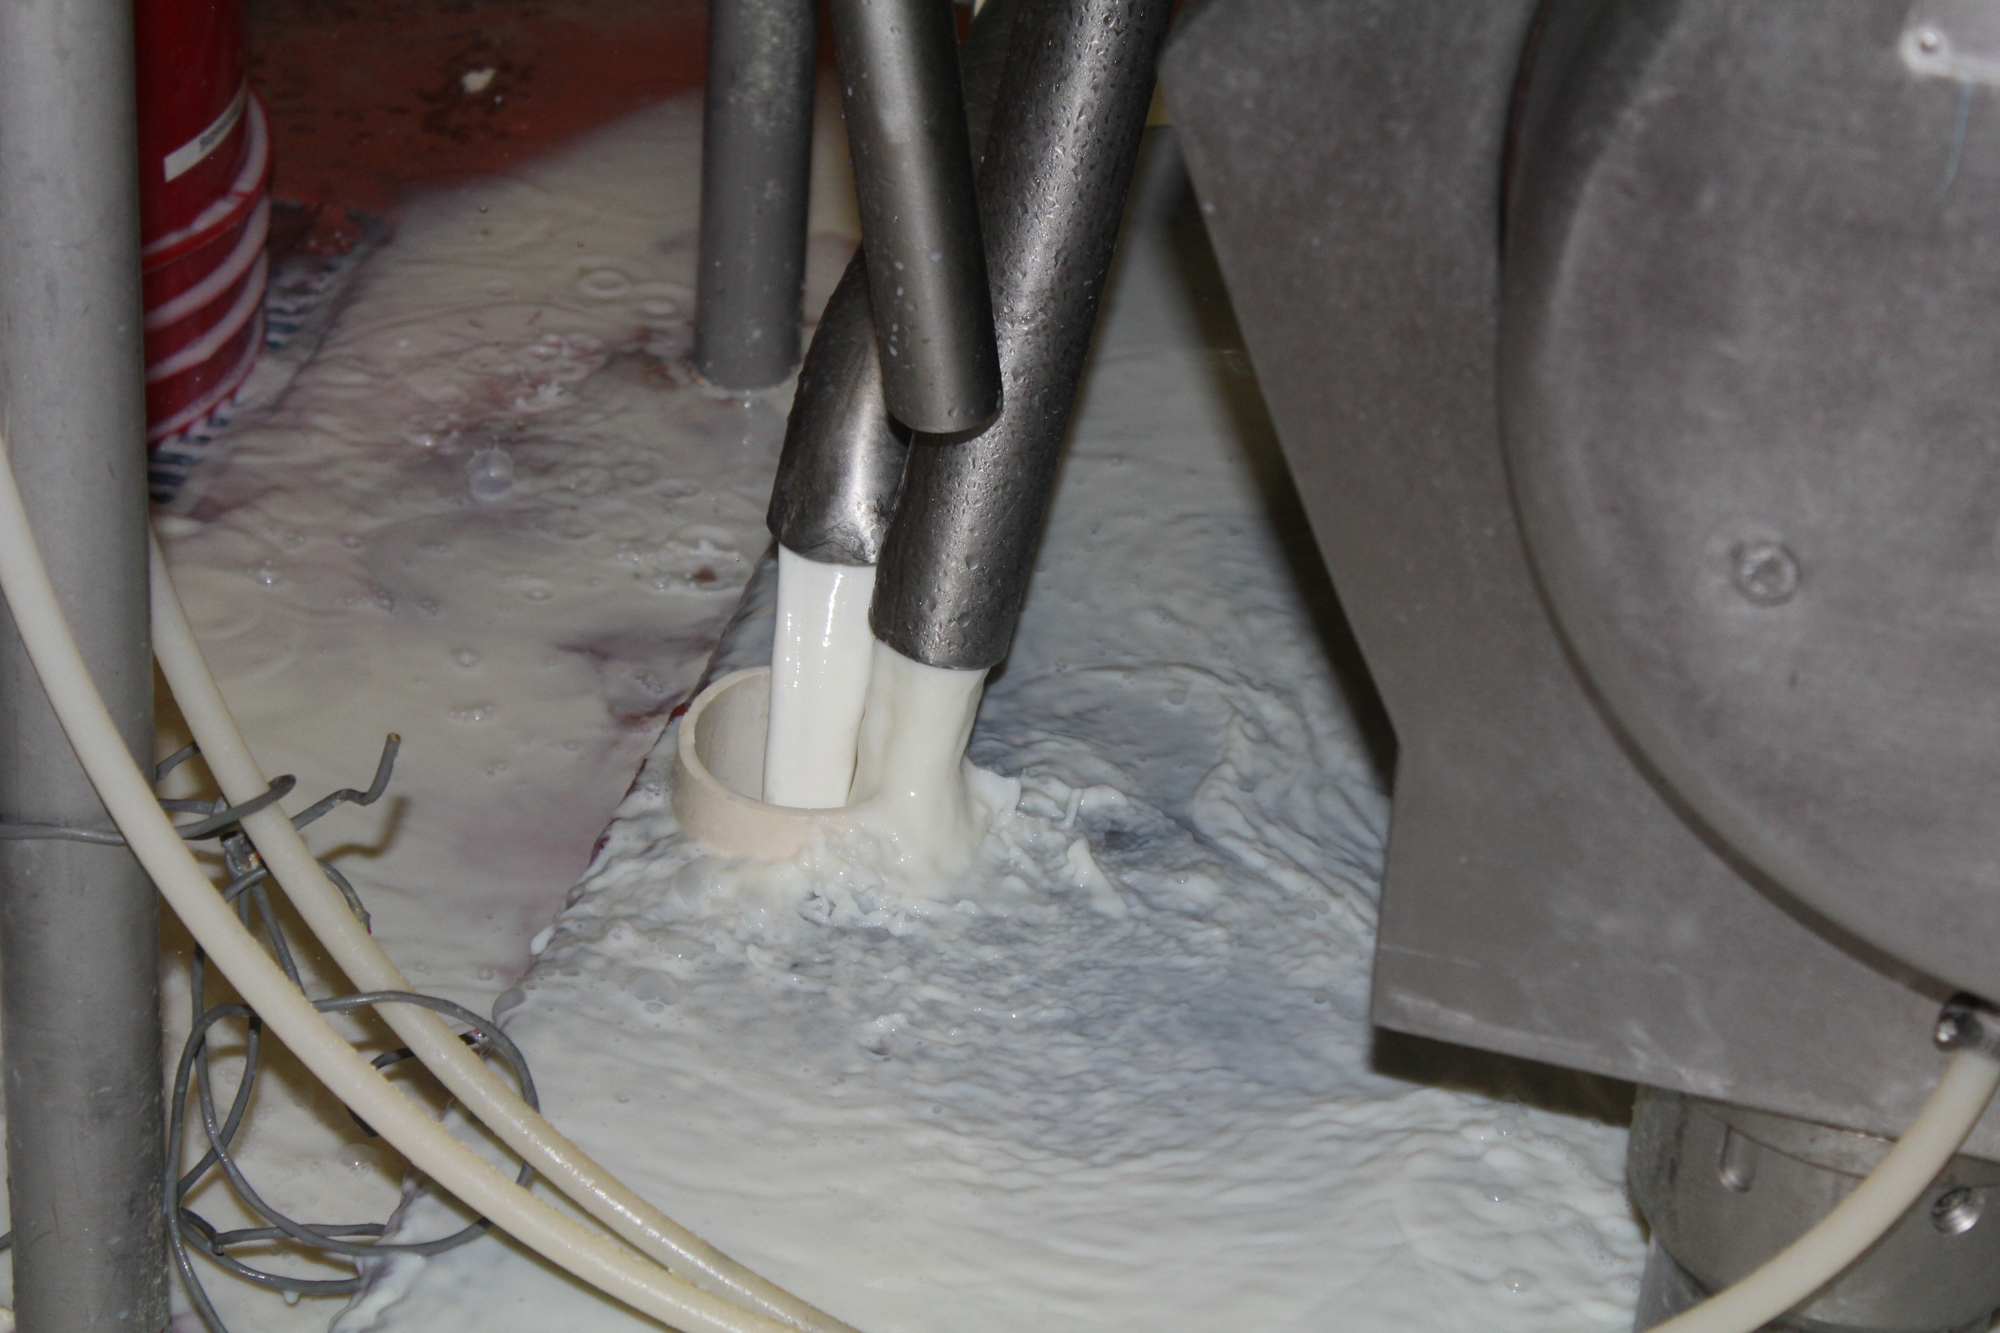 About 75,000 gallons of skim milk had to be dumped down the drain at Dakin Dairy Farms.